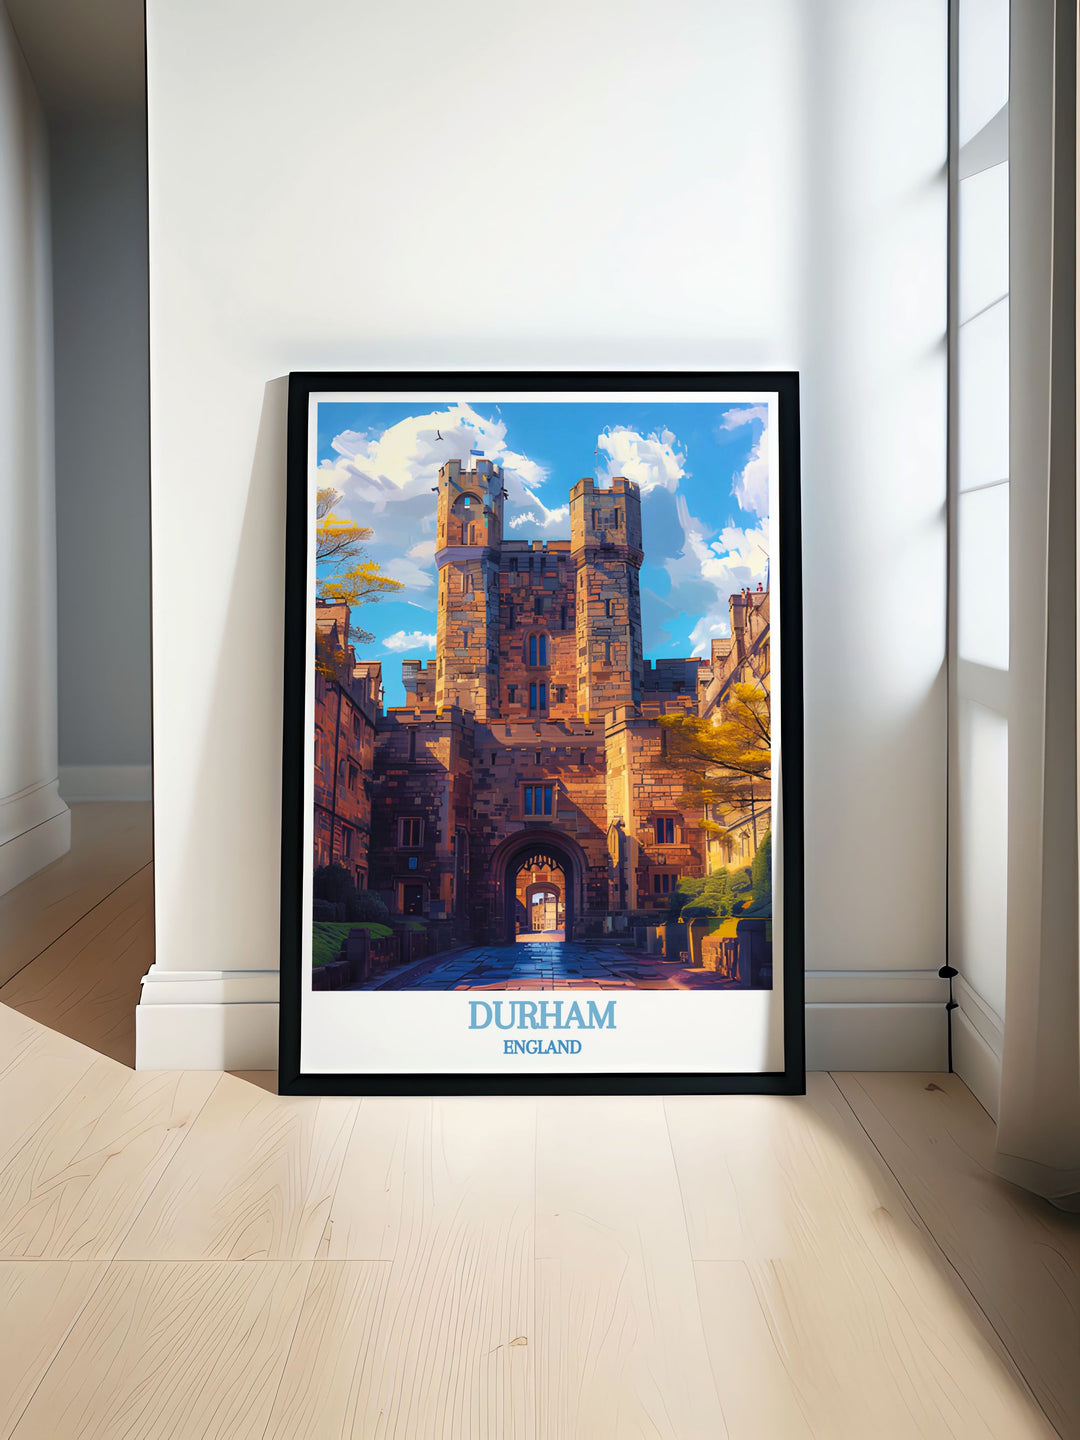 Durhams rich history and scenic landscapes are celebrated in this poster, featuring the iconic castle and inviting you to explore its enchanting streets.